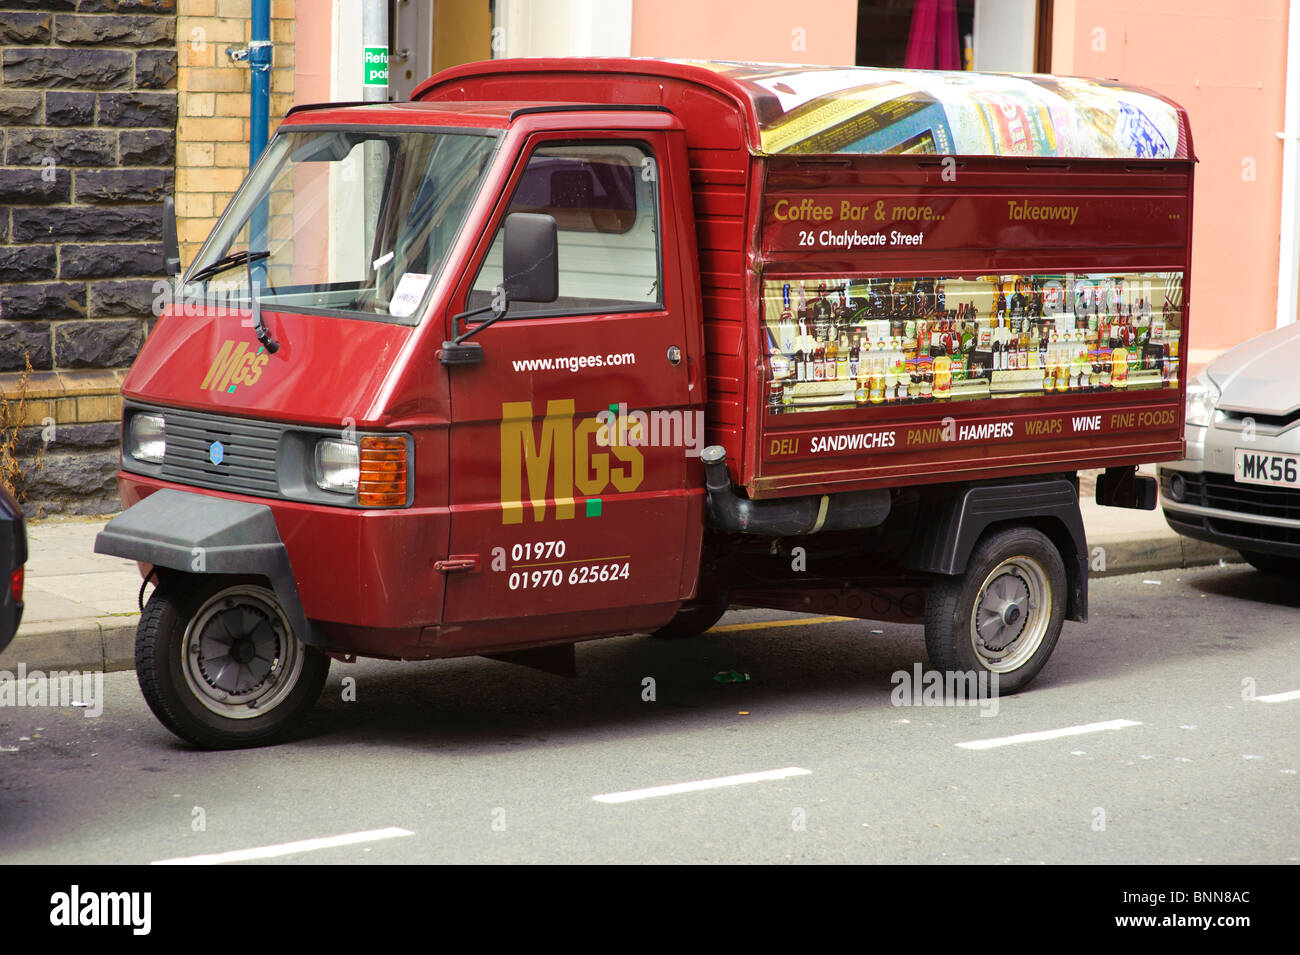 Mini three wheel food delivery van, bringing snacks and meals to shops and offices, UK Stock Photo